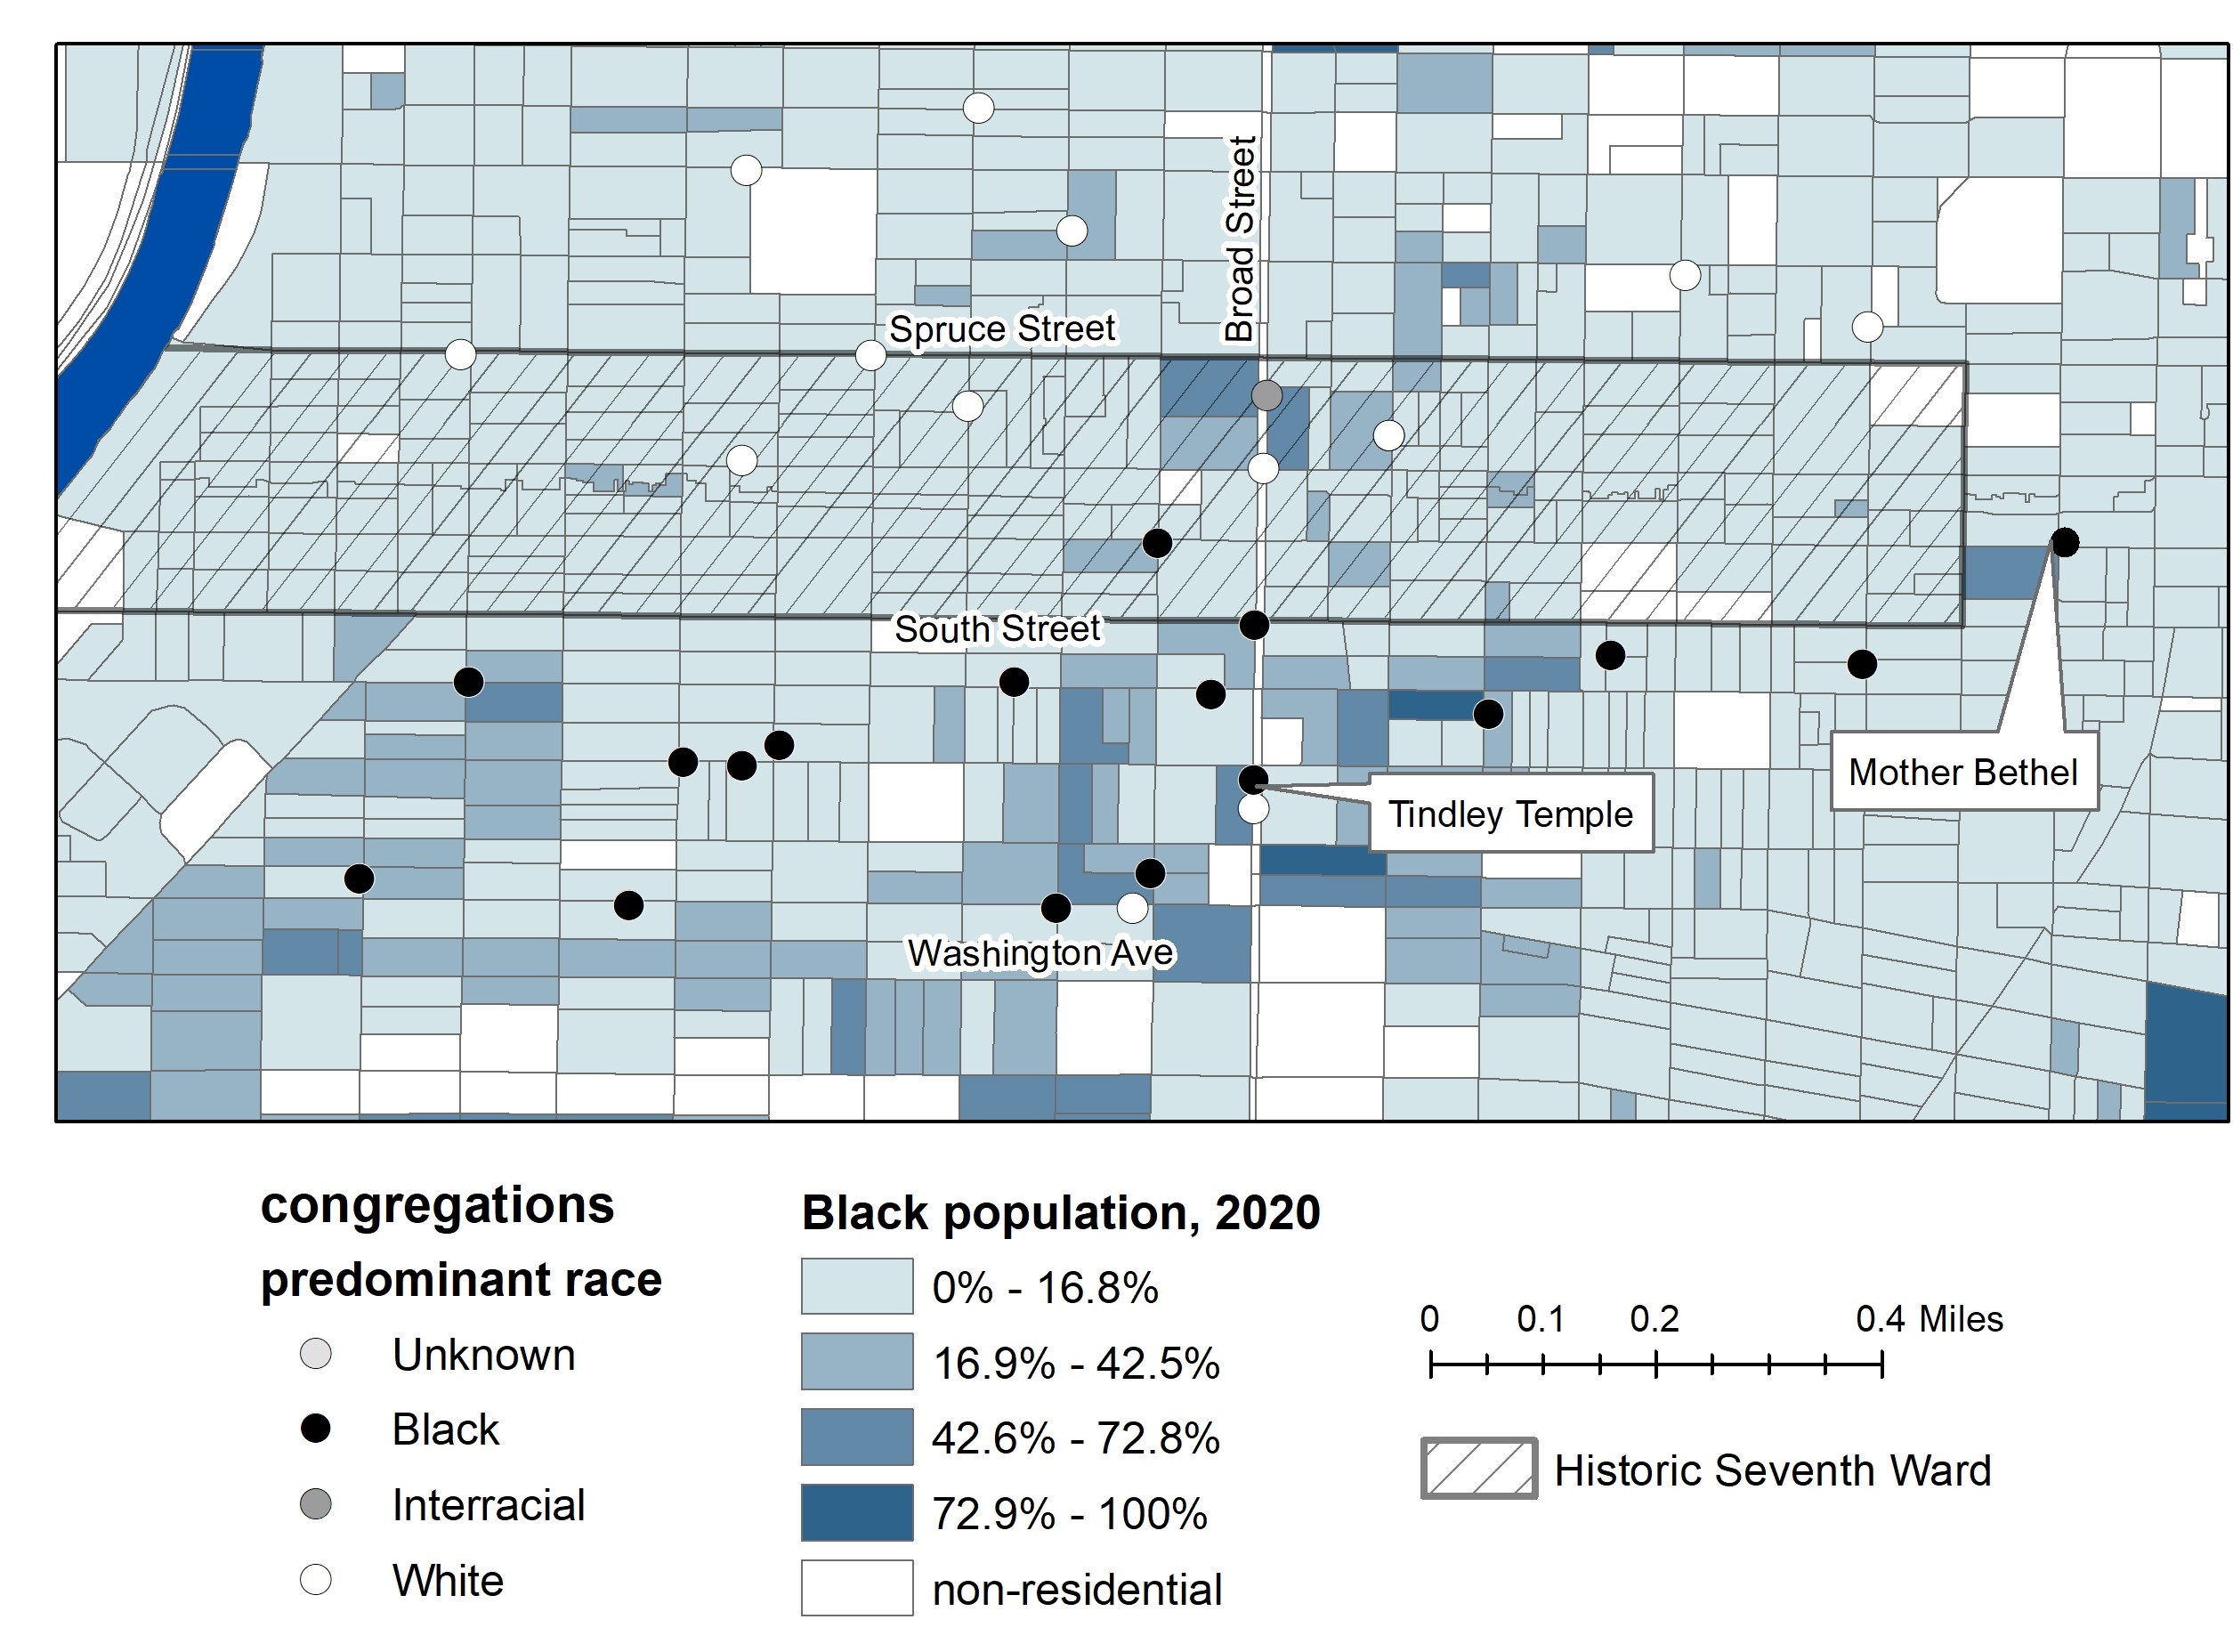 Congregations in the Seventh ward and vicinity and Black Population, 2020